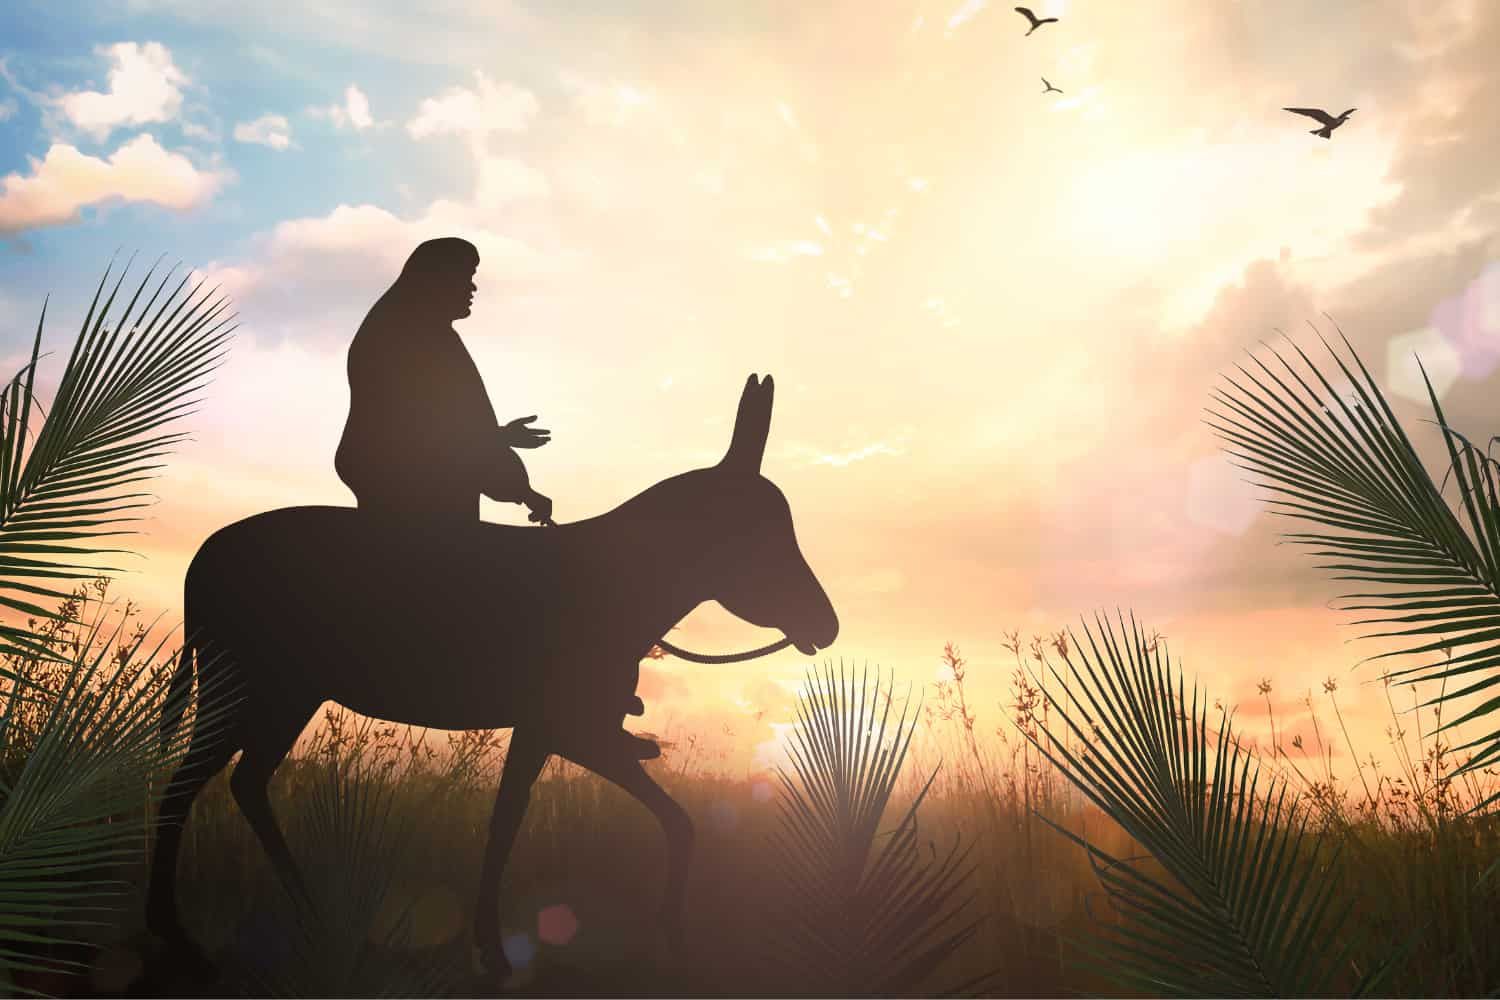 Lesson%20-%20NT%20Easter%2002%20-%20Palm%20Sunday%202%20Humble%20on%20a%20donkey-c3dfbb64 Animals